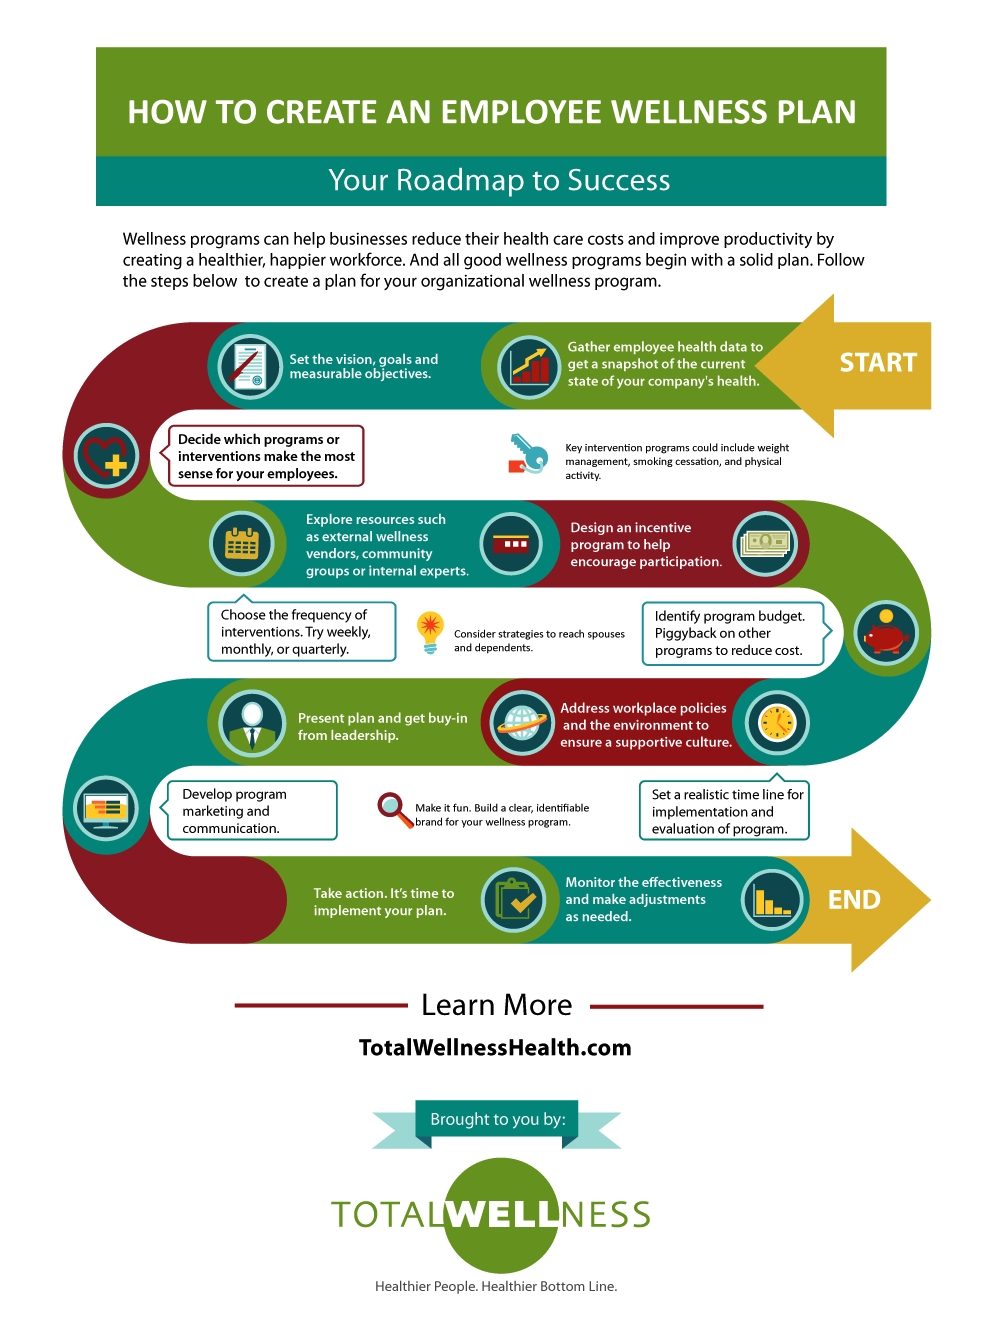 How To Create An Employee Wellness Plan - Infographic-Monthly Wellness Topics For Organizations